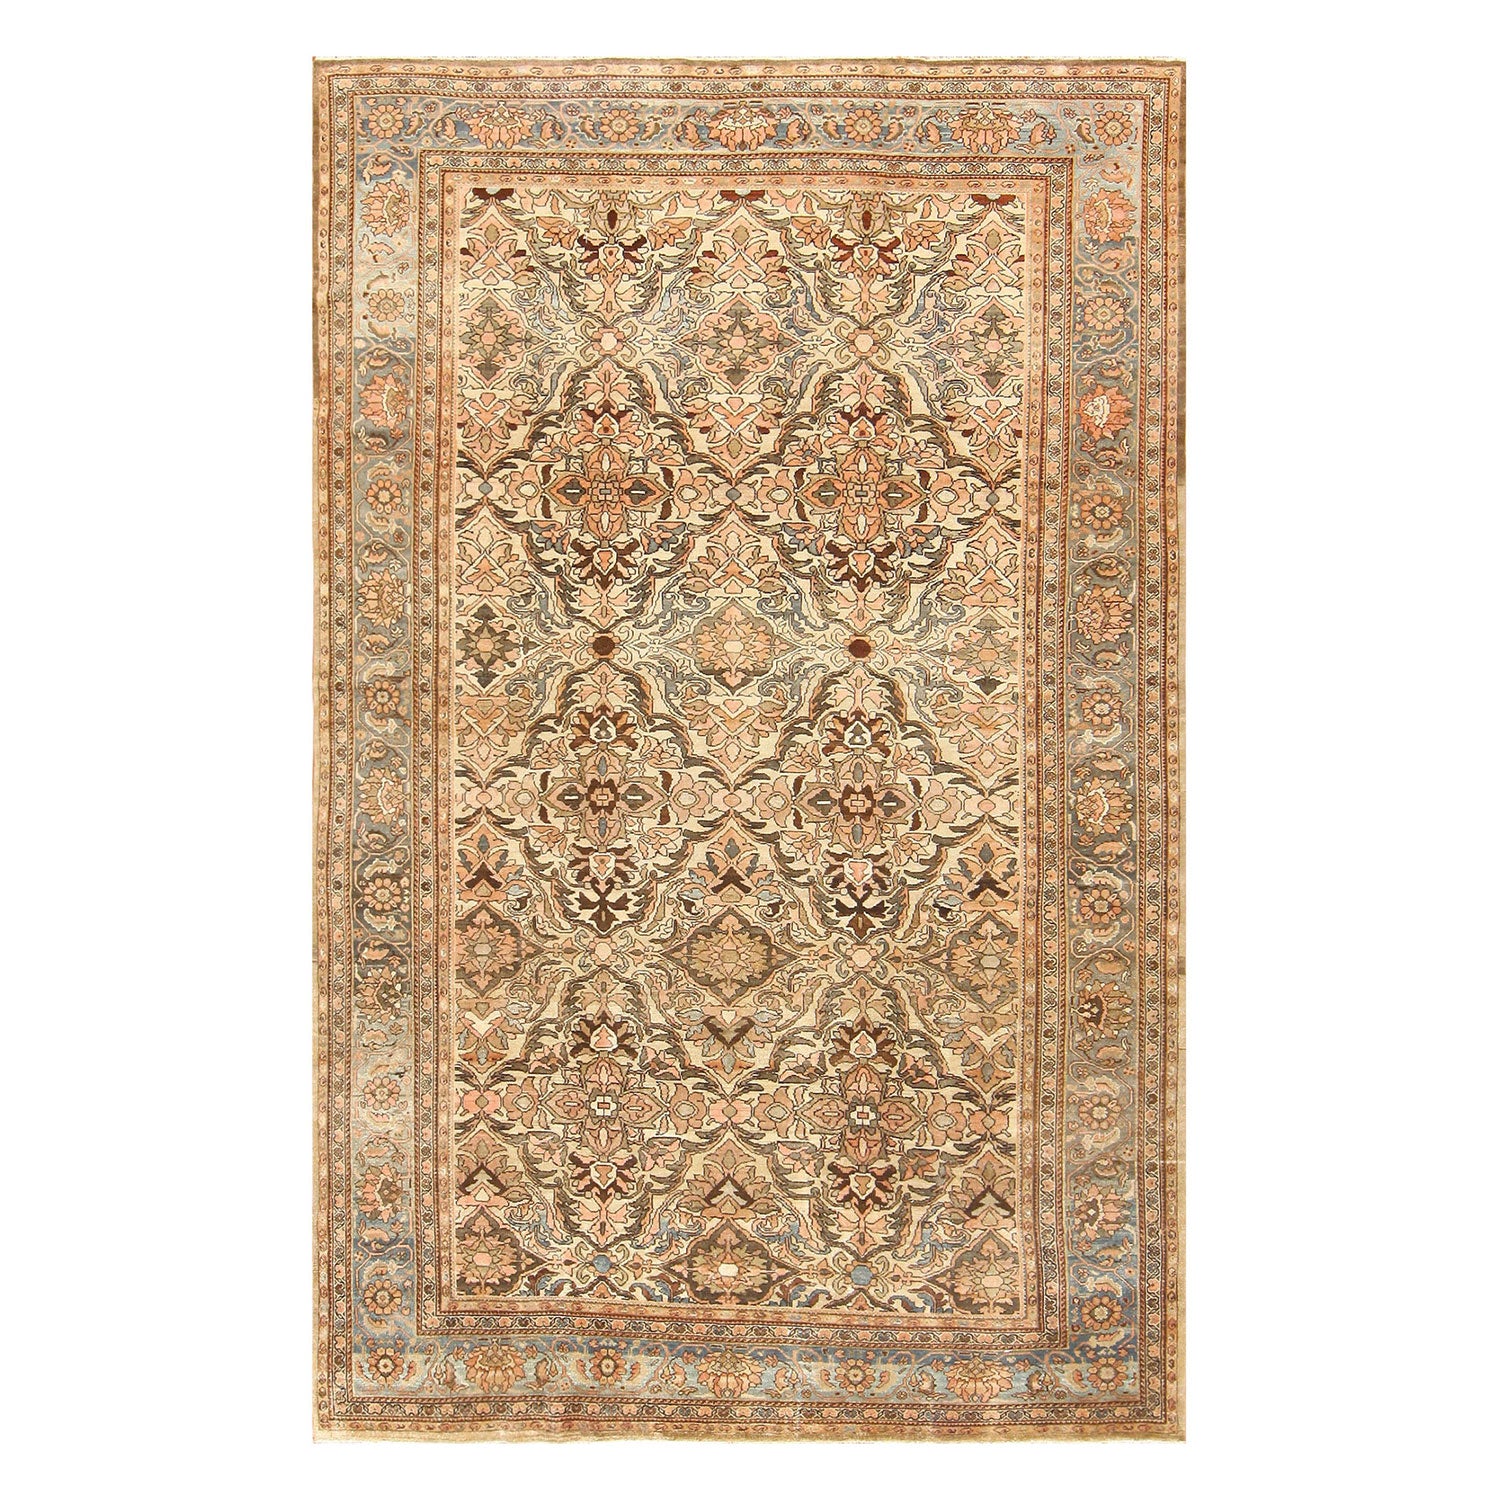 Exquisite handwoven rug with intricate patterns and vibrant colors.